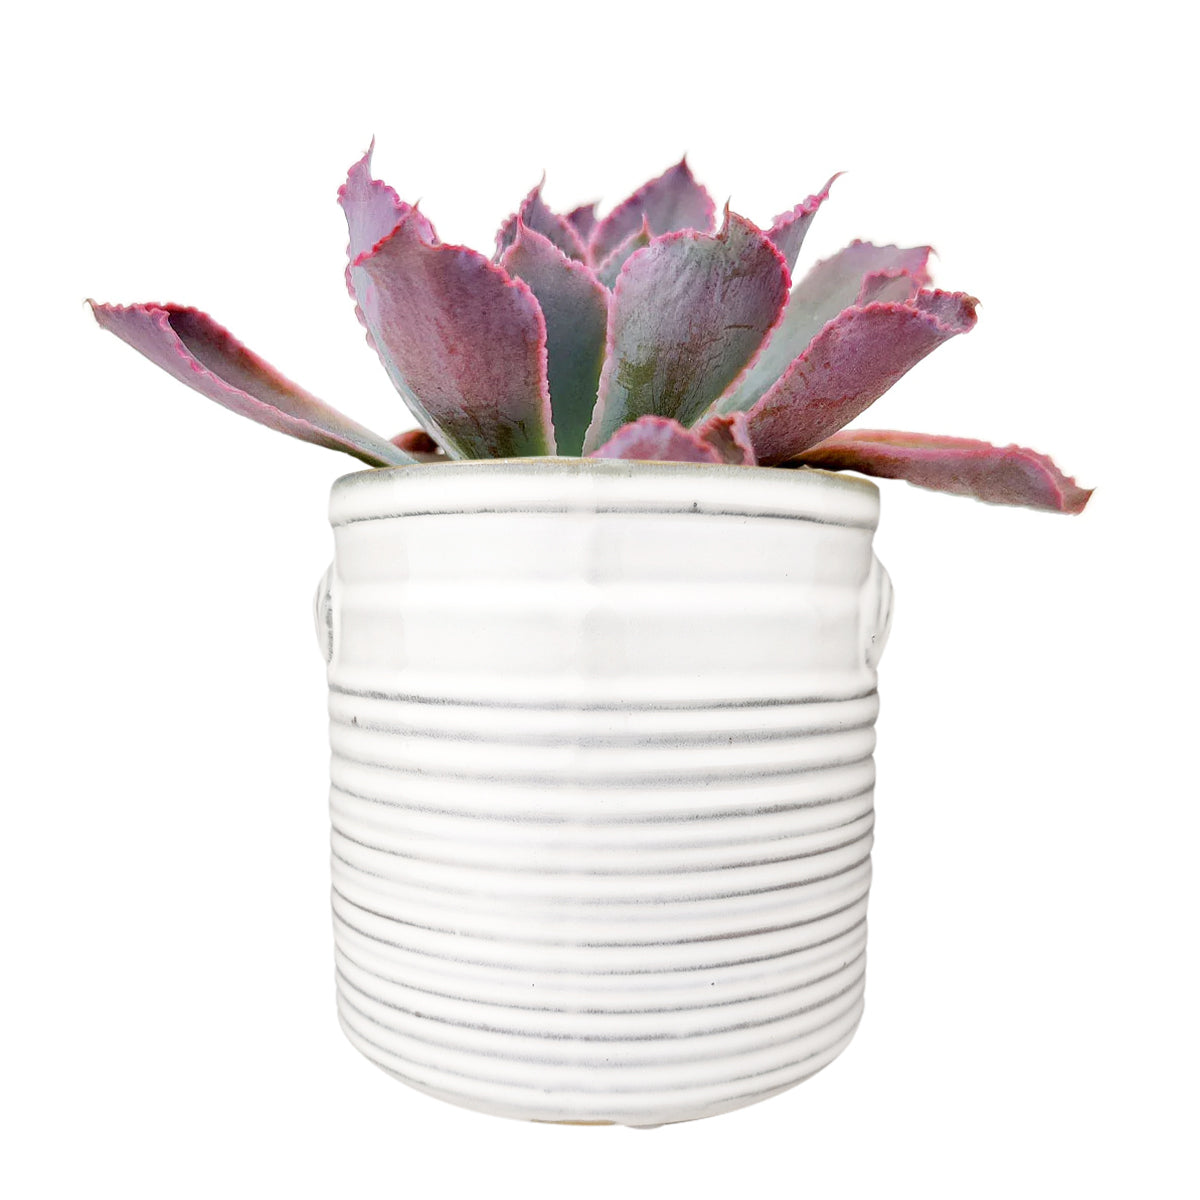 6 inch White Ribbed Ceramic Pot, 6 inch white vintage style ceramic pot, pots for succulents and cacti, planter for sale